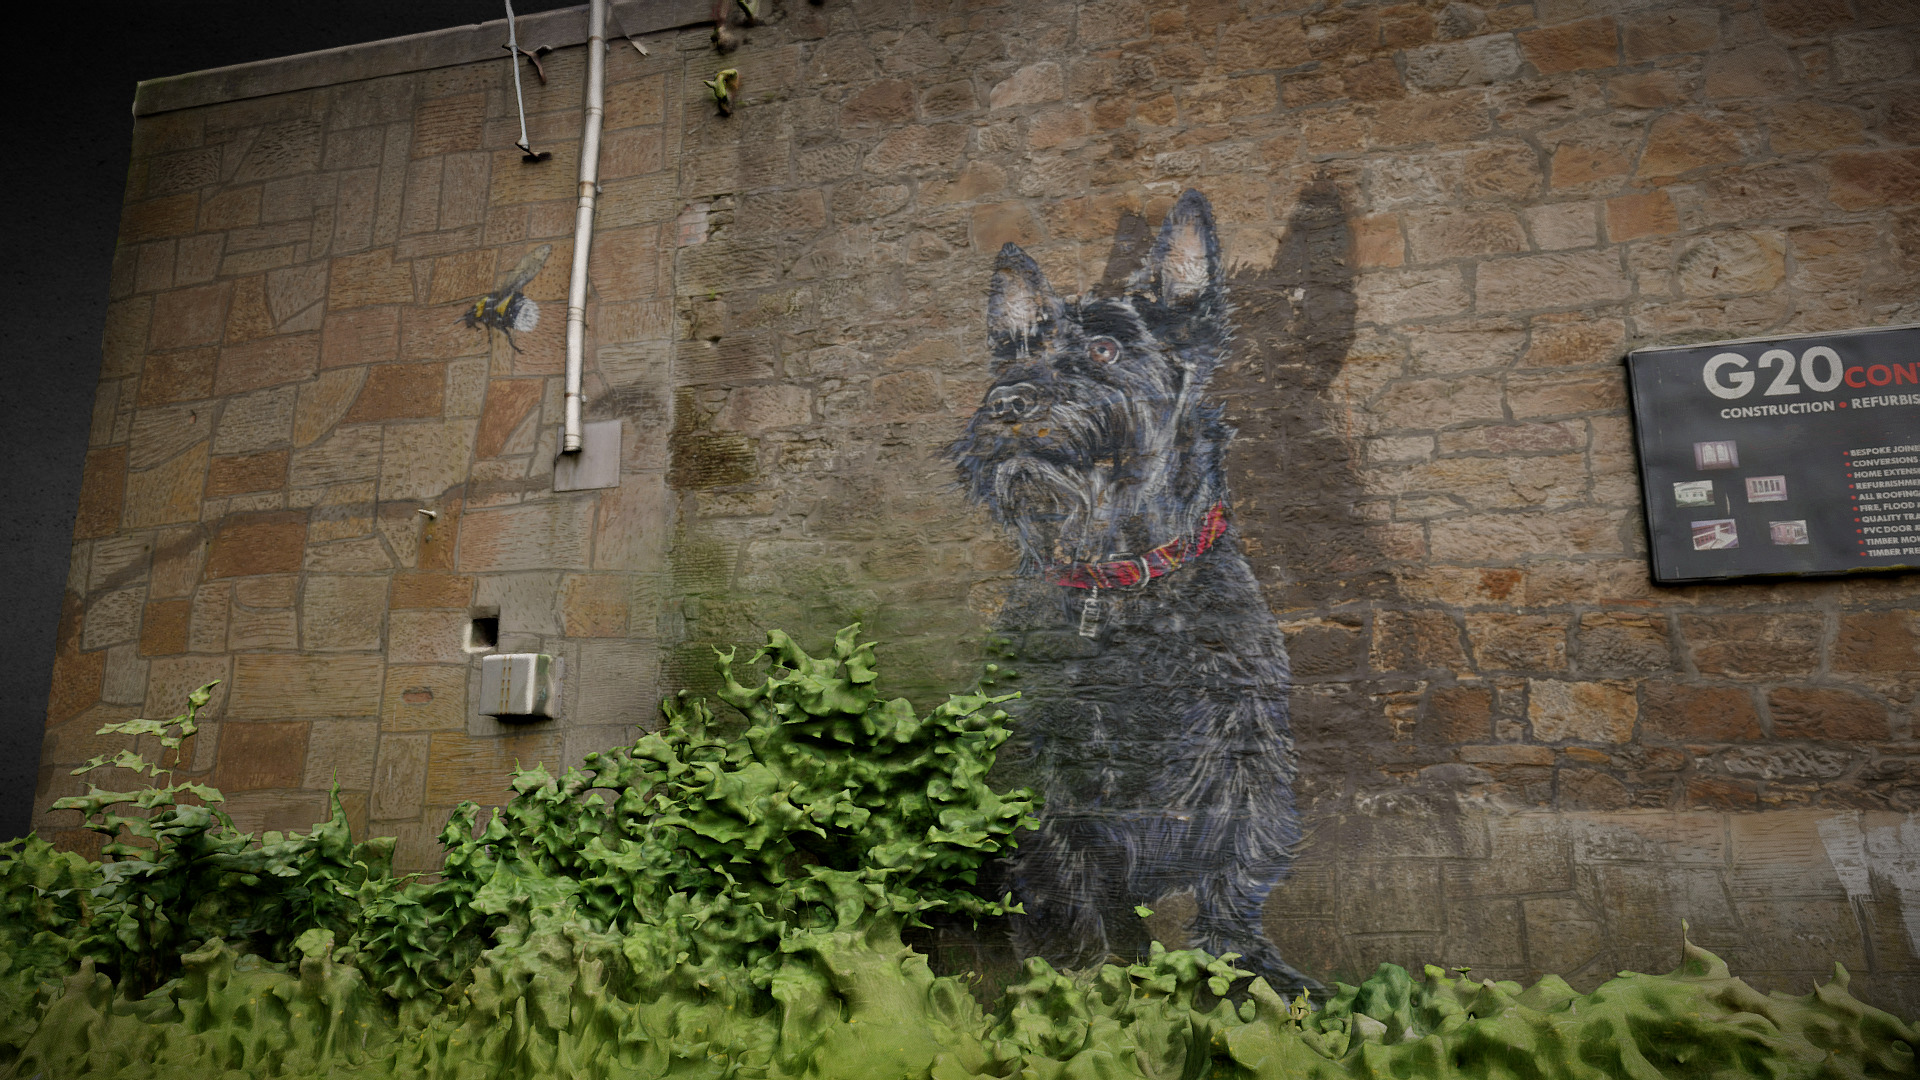 3D model Wall Mural Maryhill Road Glasgow - This is a 3D model of the Wall Mural Maryhill Road Glasgow. The 3D model is about a cat sitting on a ledge.